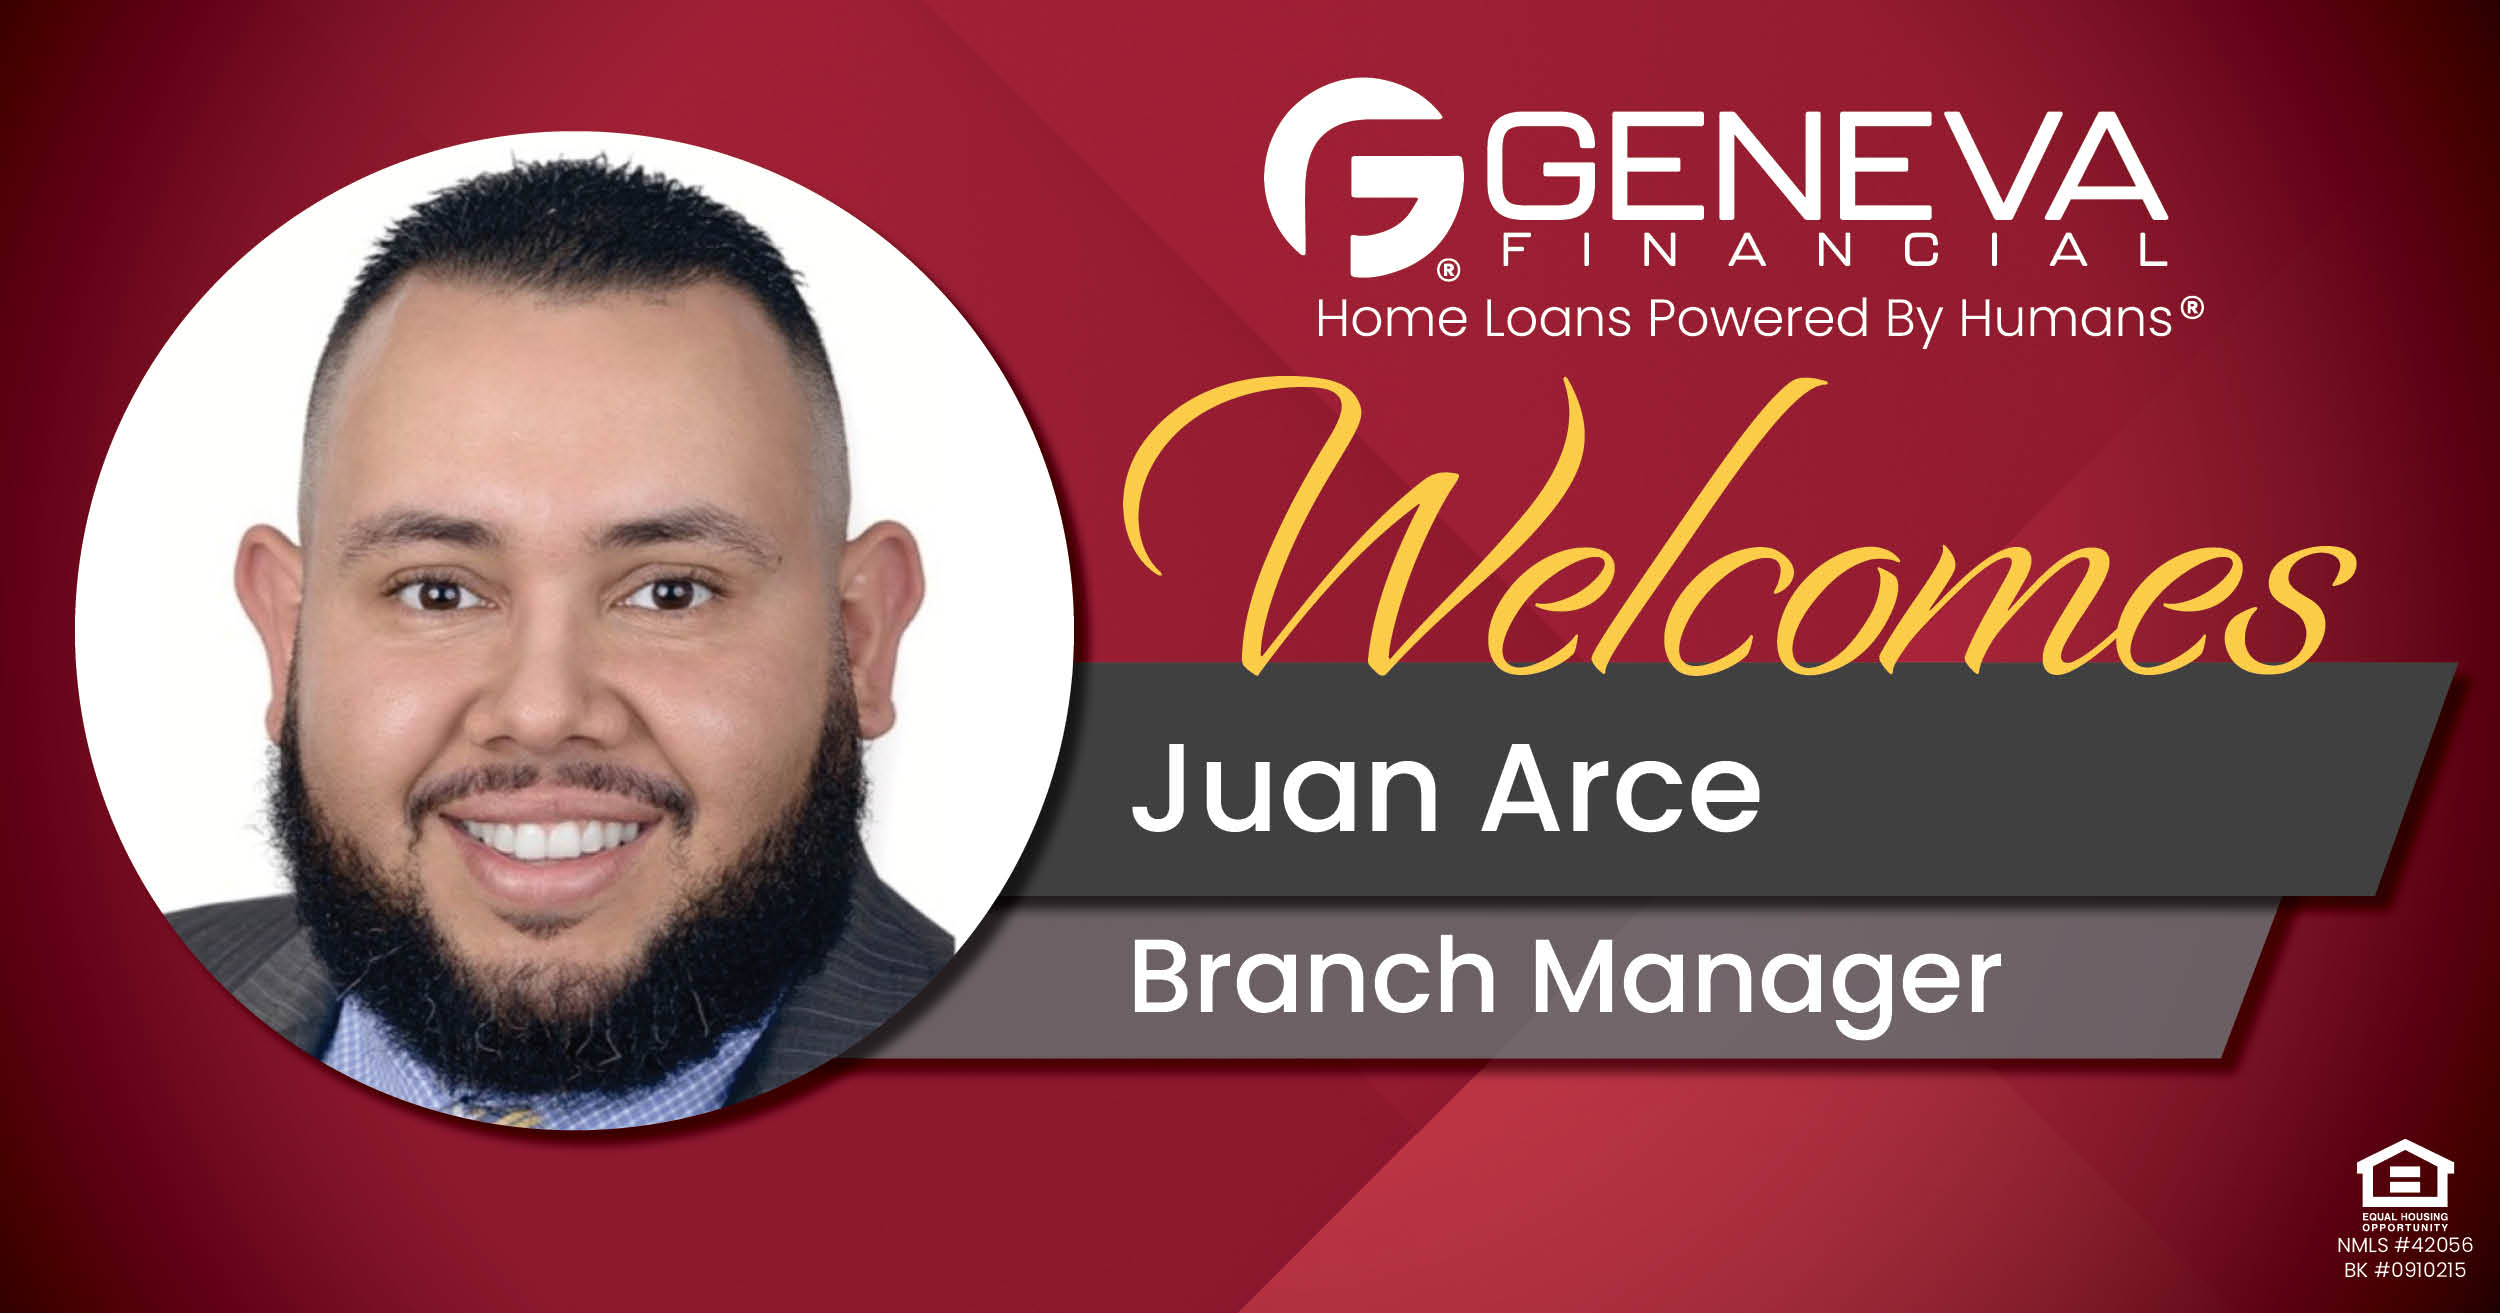 Geneva Financial Welcomes New Branch Manager Juan Arce to Phoenix, AZ – Home Loans Powered by Humans®.